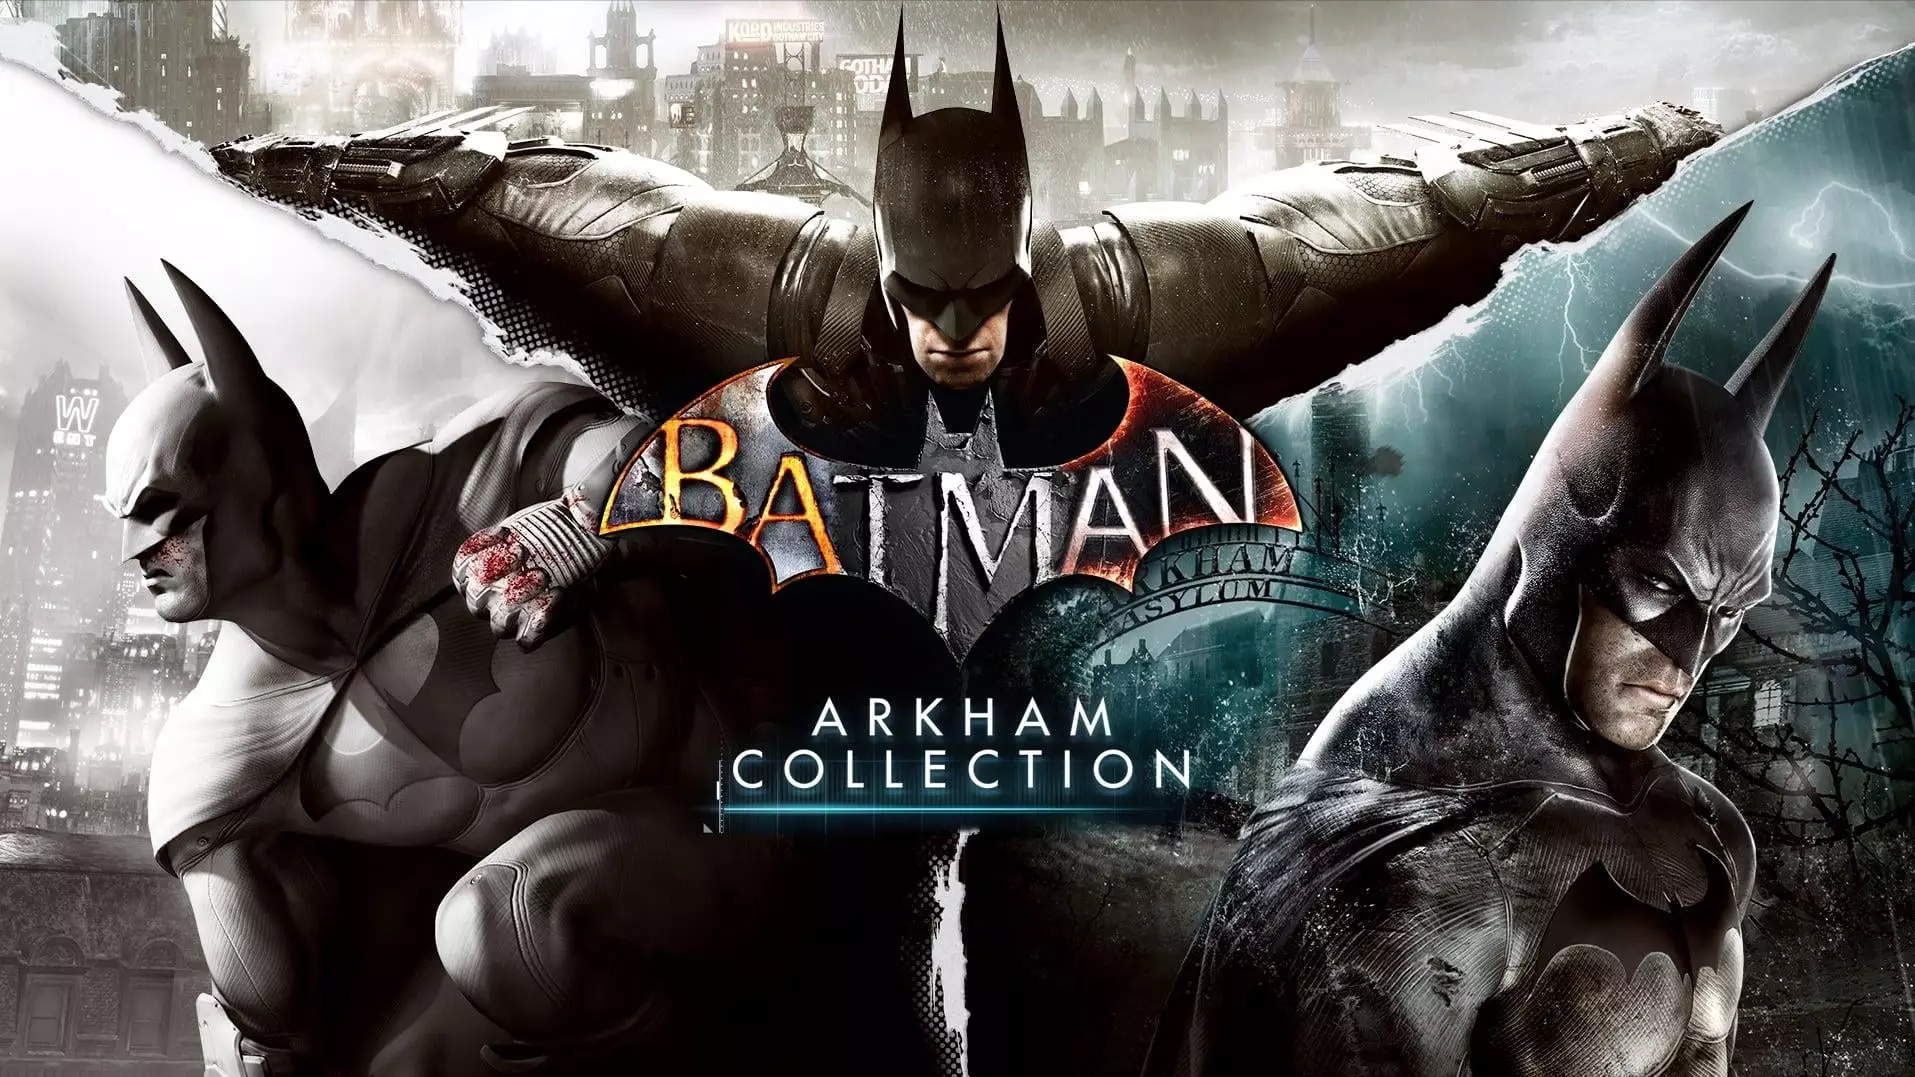 Batman: Arkham Collection could release tomorrow. 